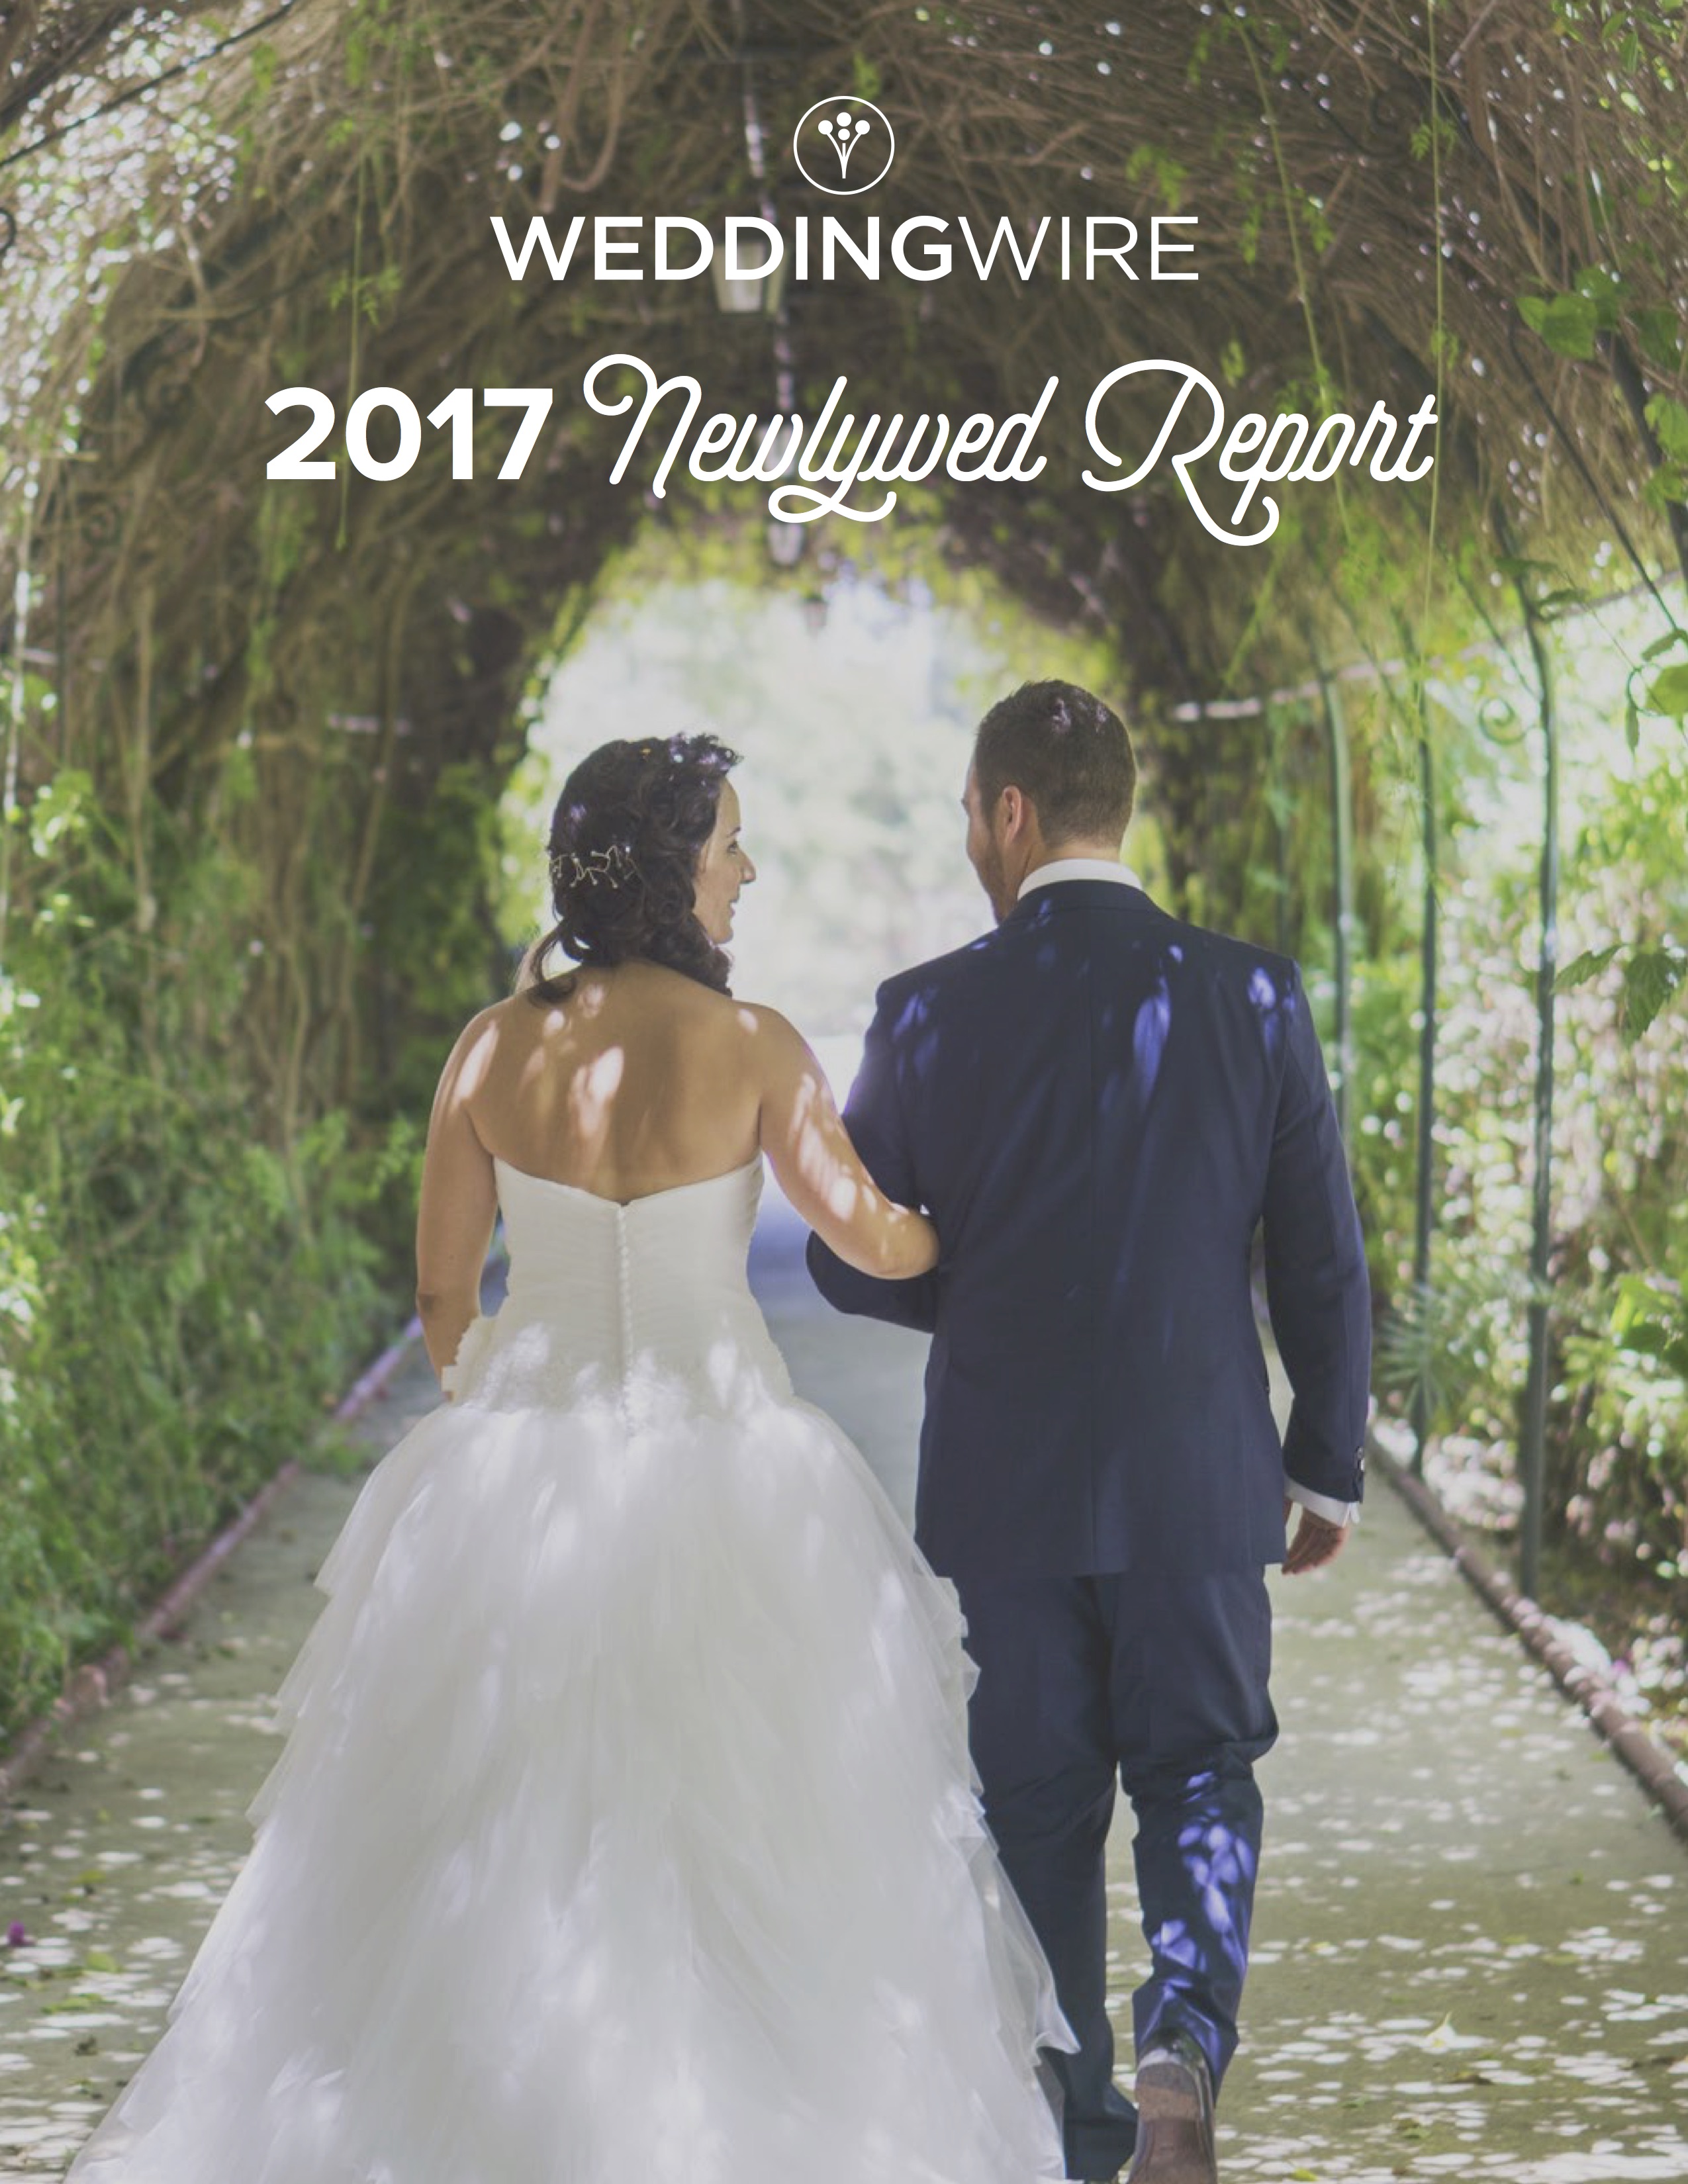 Wedding Wednesday- Trends from 2016